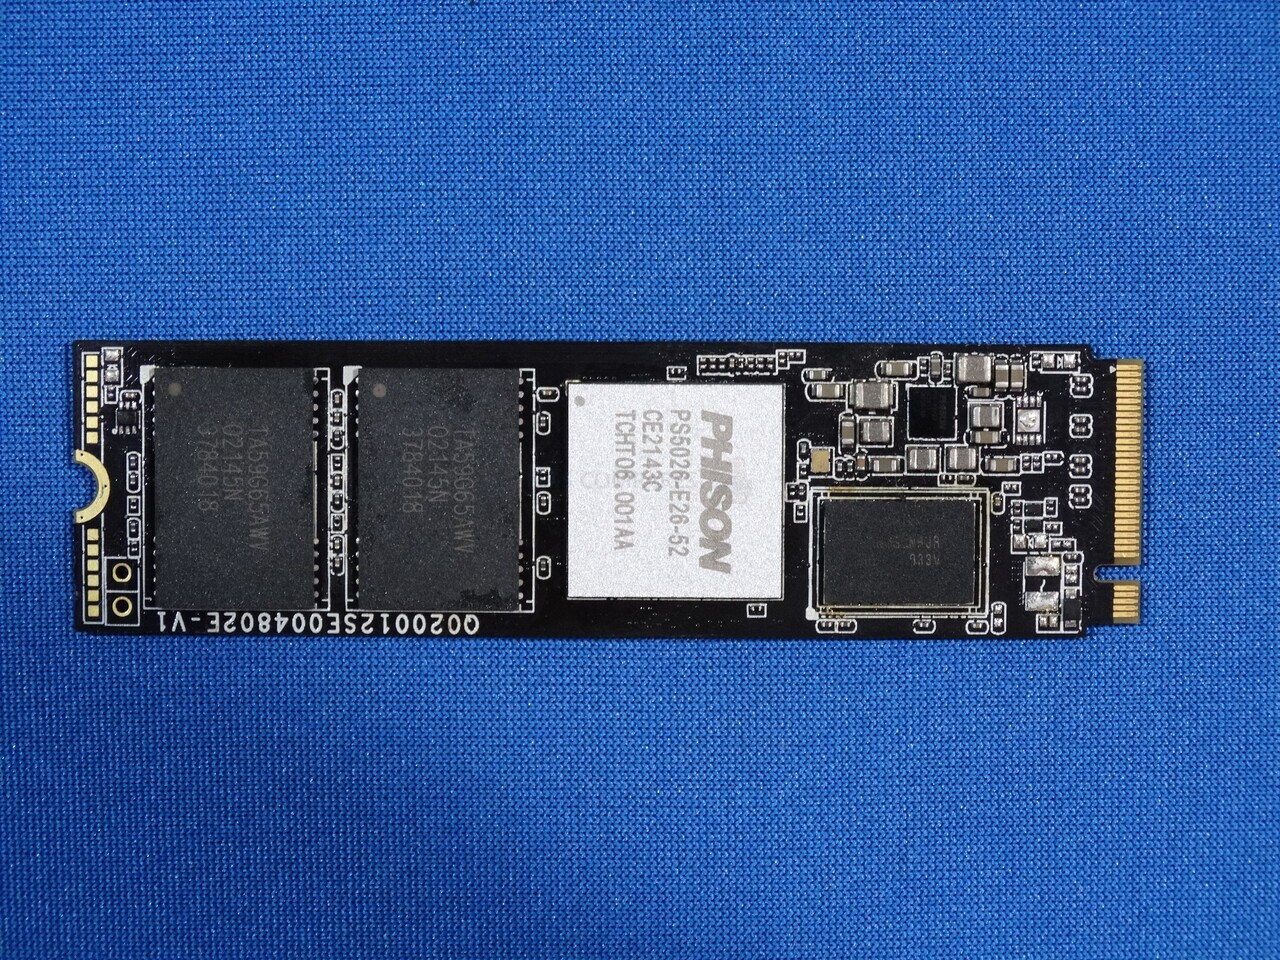 Phison PS5026-E26 Reference Design PCIe 5.0 2TB NVMe M.2 SSD Preview -  Things Just Got a Whole Lot Faster